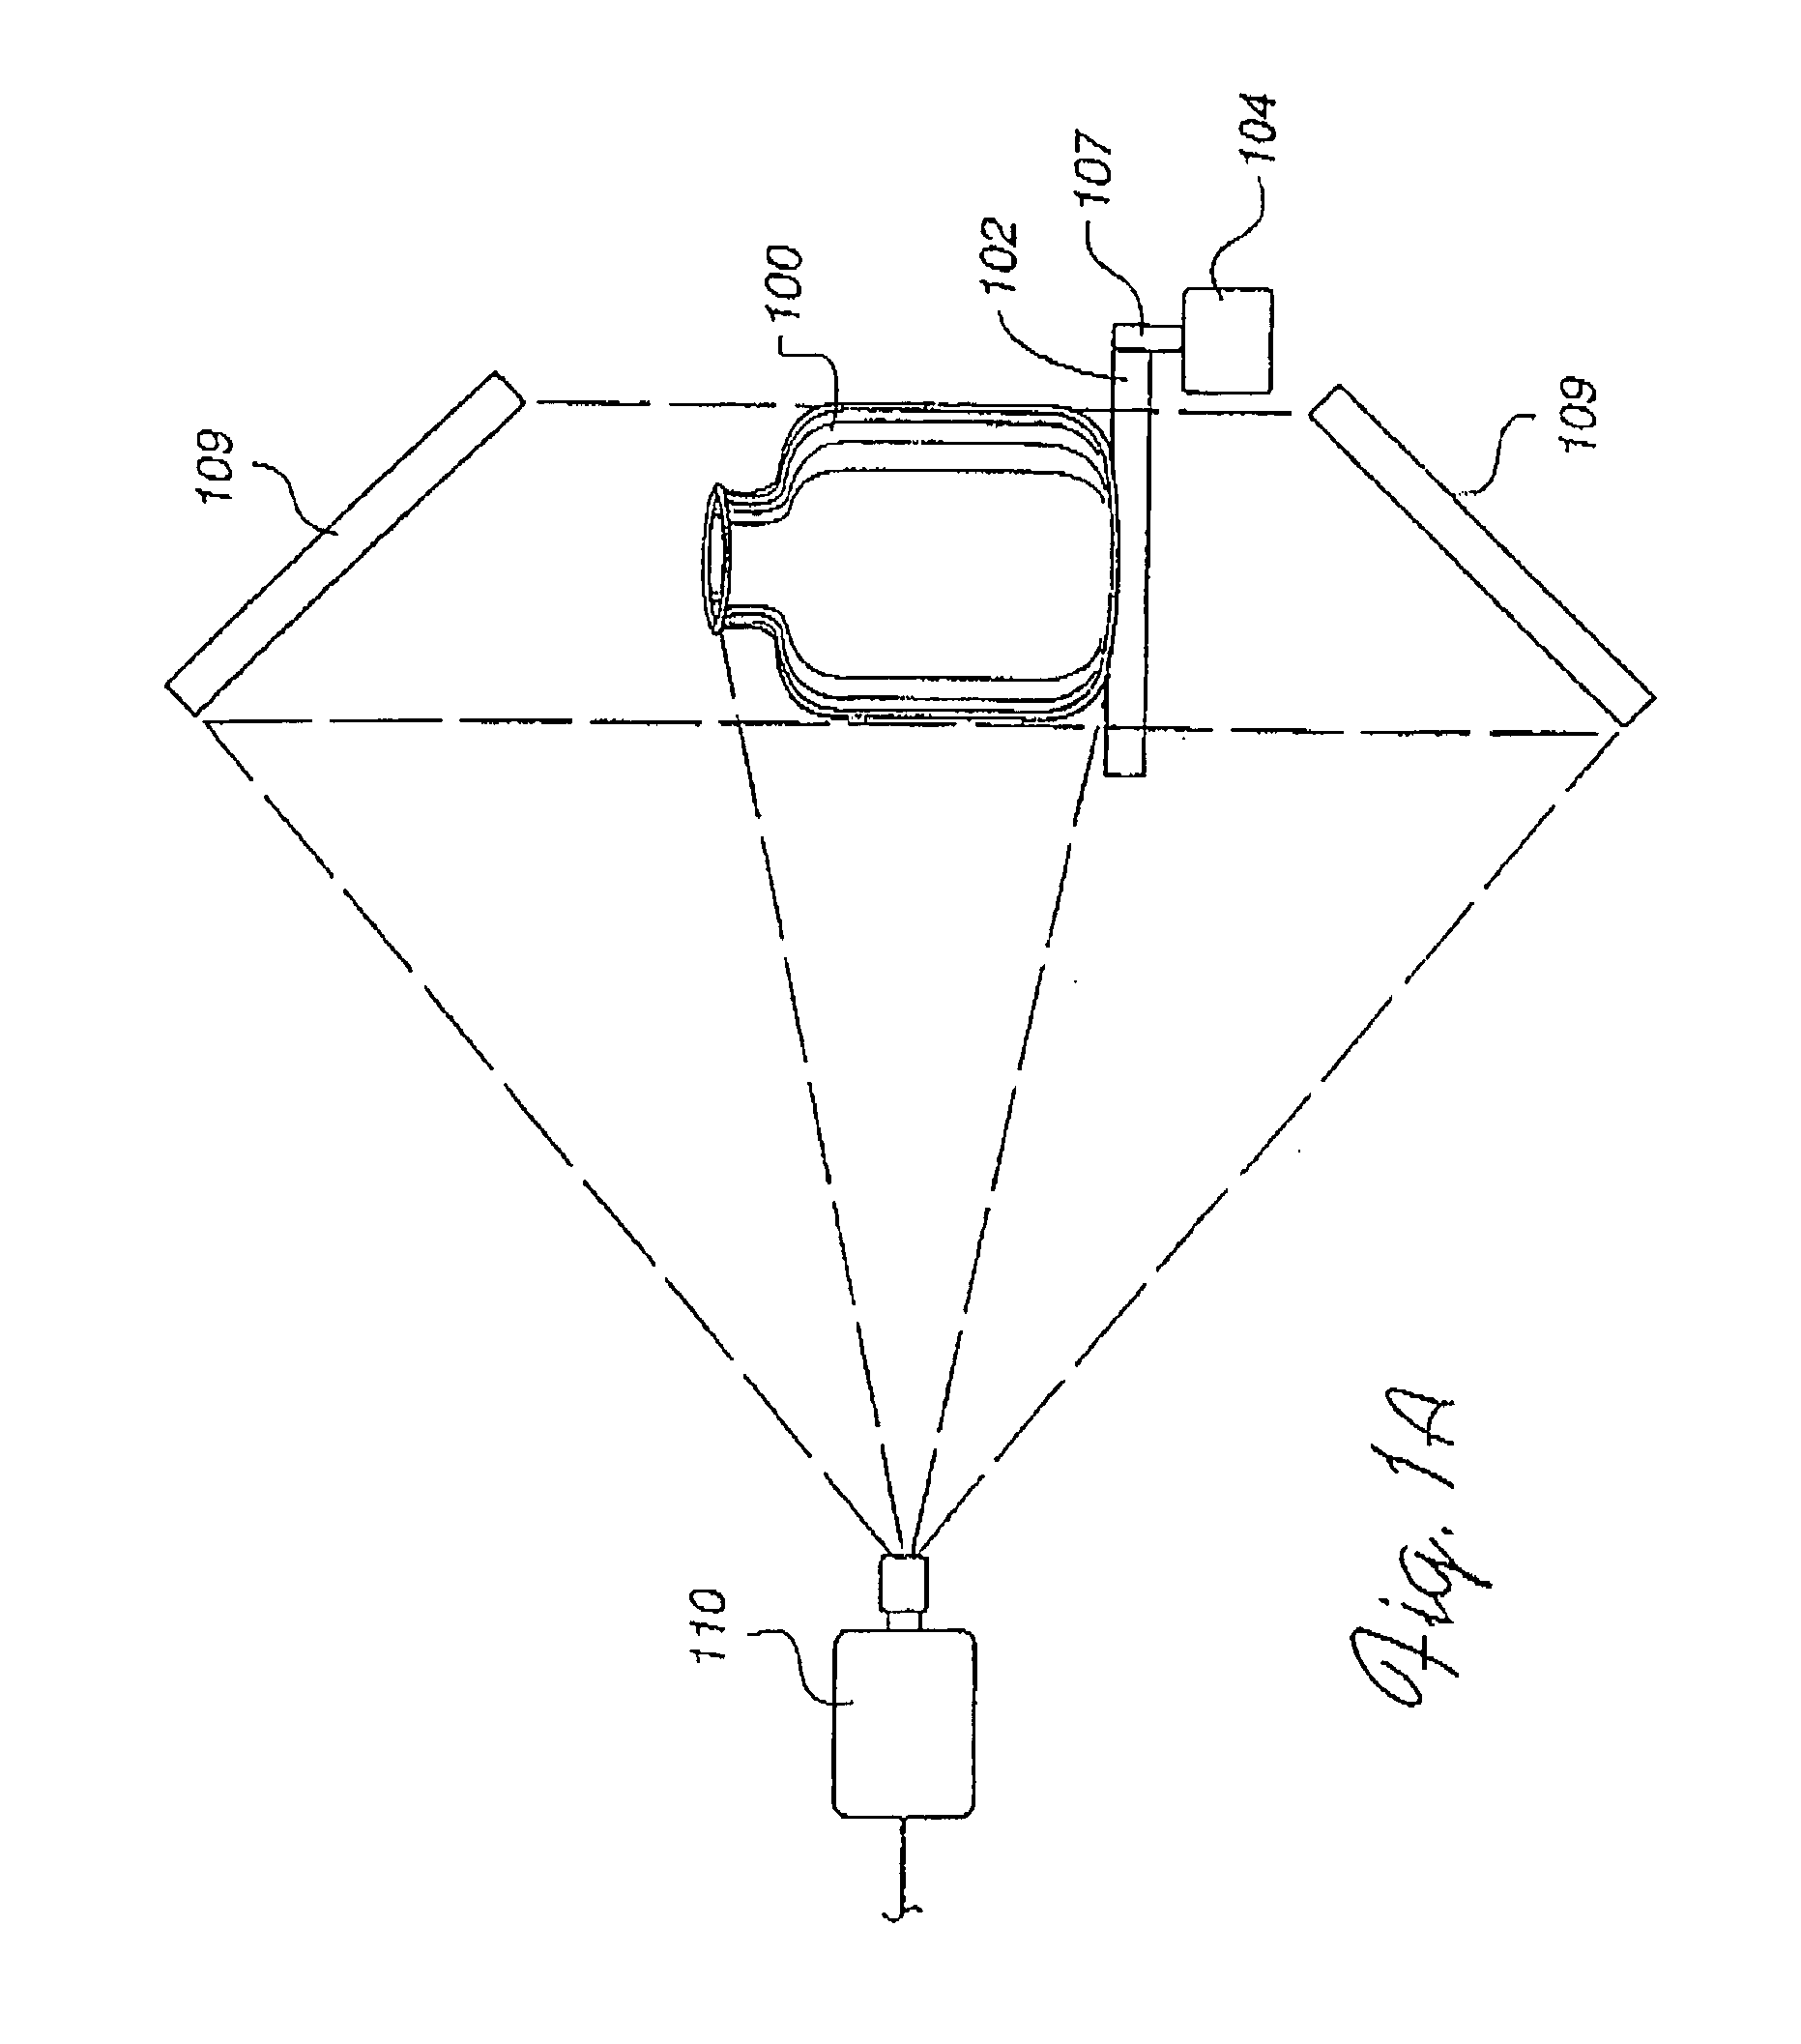 Method and apparatus for scanning three-dimensional objects